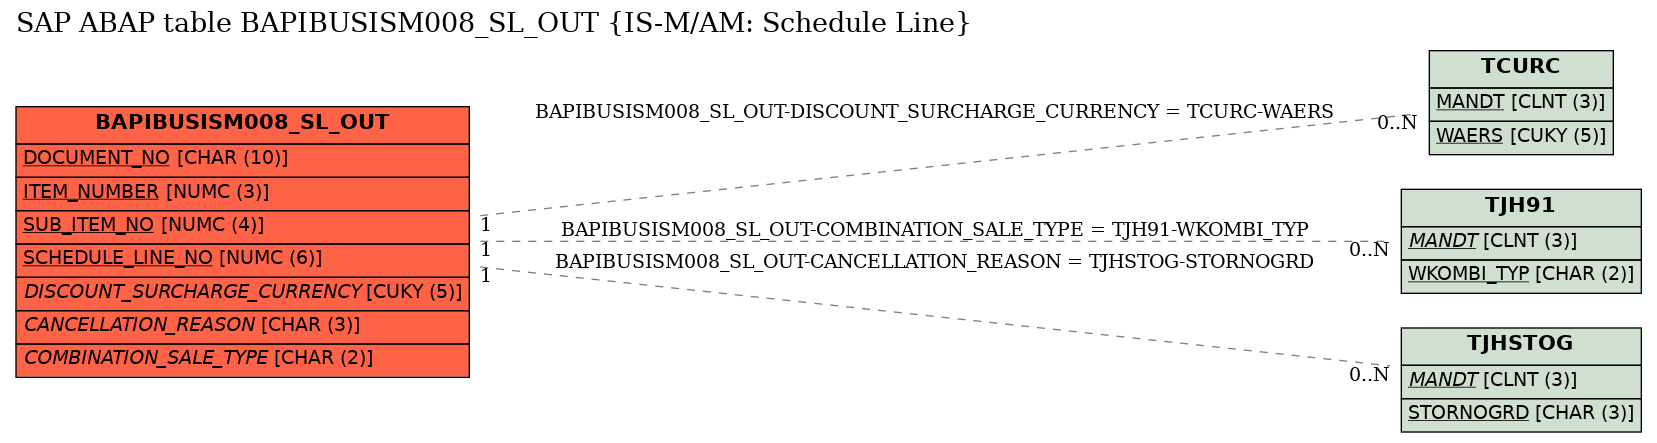 E-R Diagram for table BAPIBUSISM008_SL_OUT (IS-M/AM: Schedule Line)